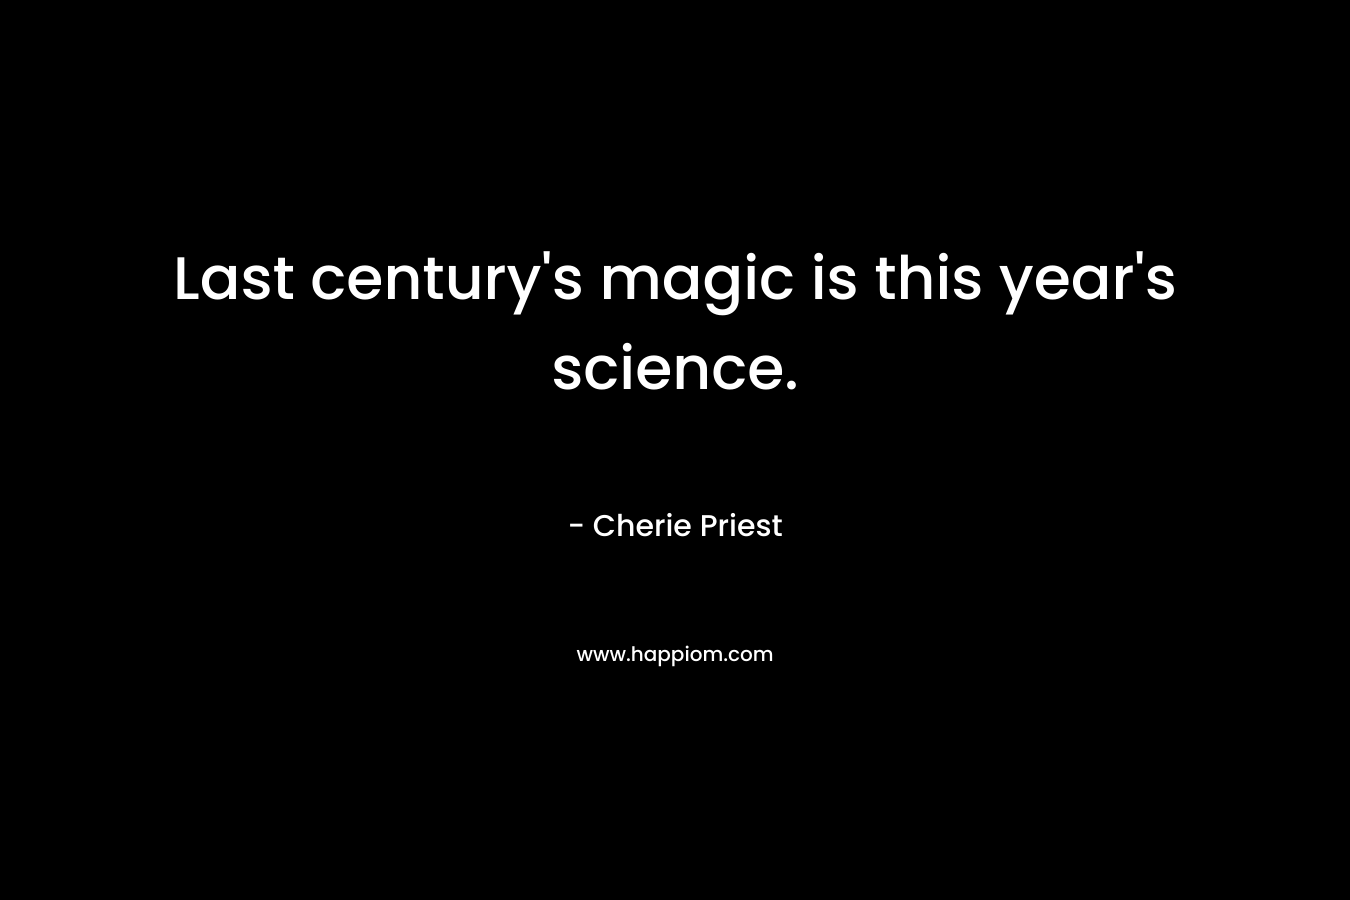 Last century’s magic is this year’s science. – Cherie Priest